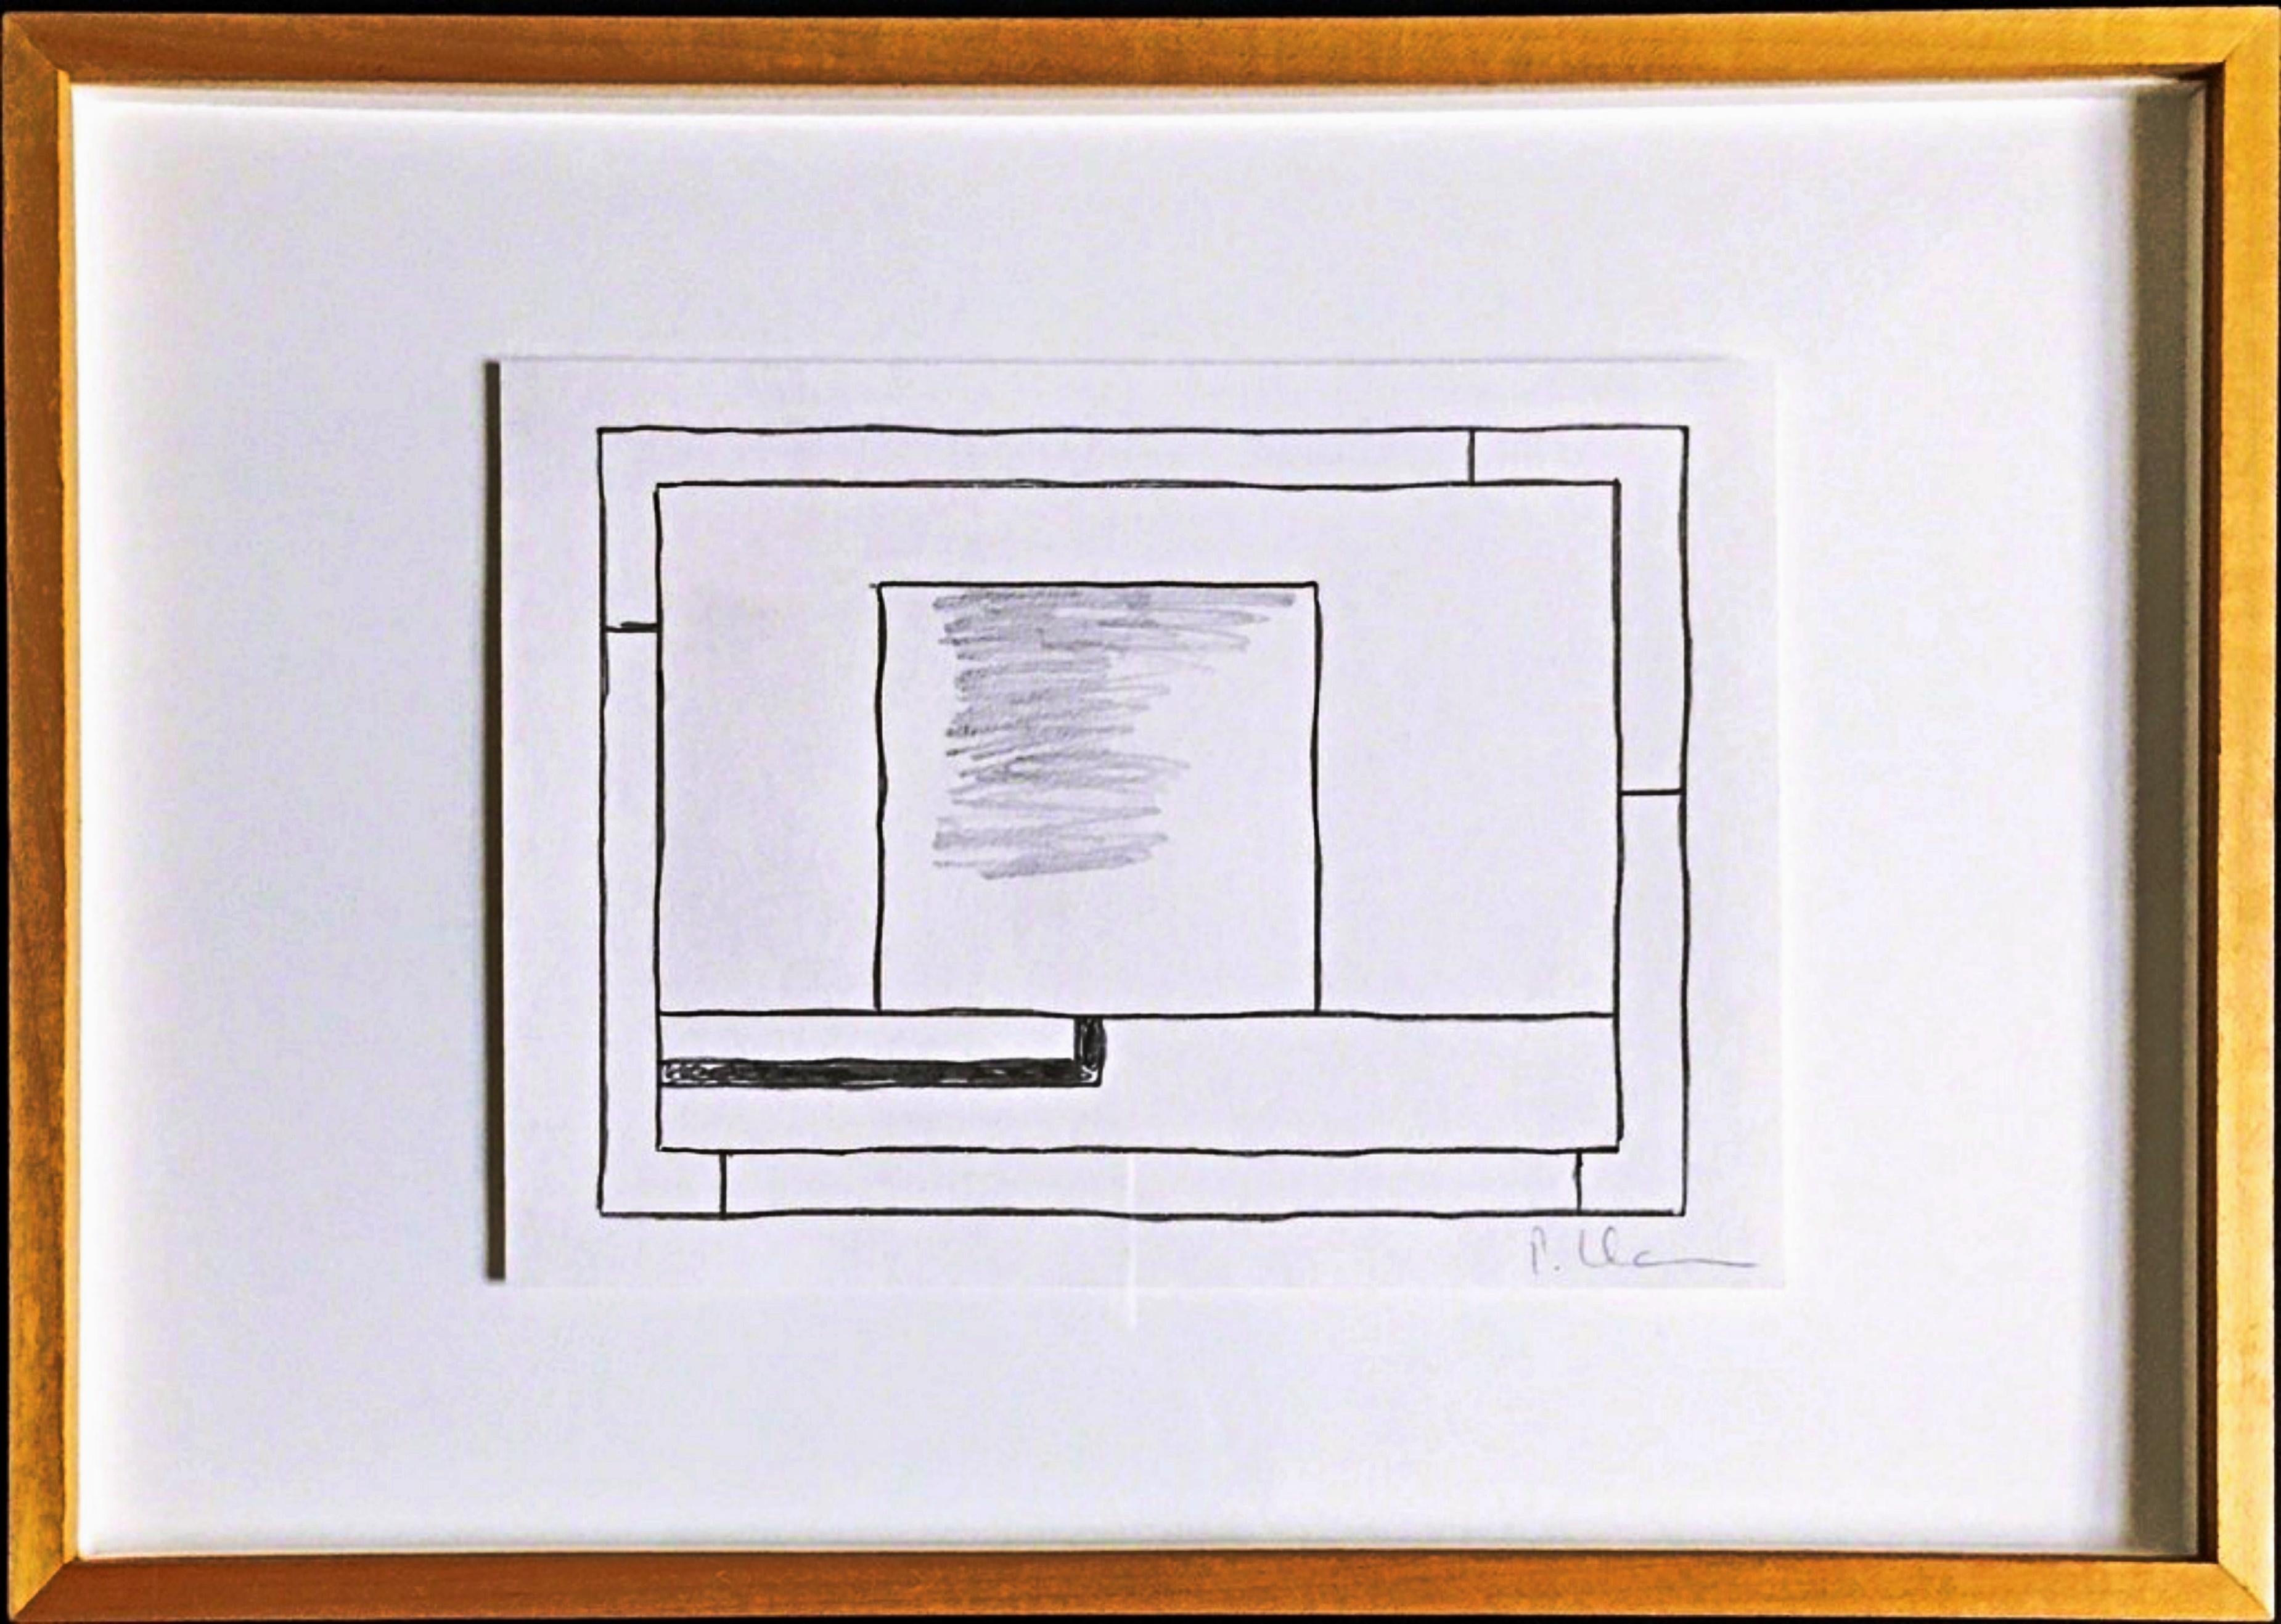 Peter Halley Abstract Drawing - Untitled Geometric Abstraction (unique graphite drawing gifted to fellow artist)